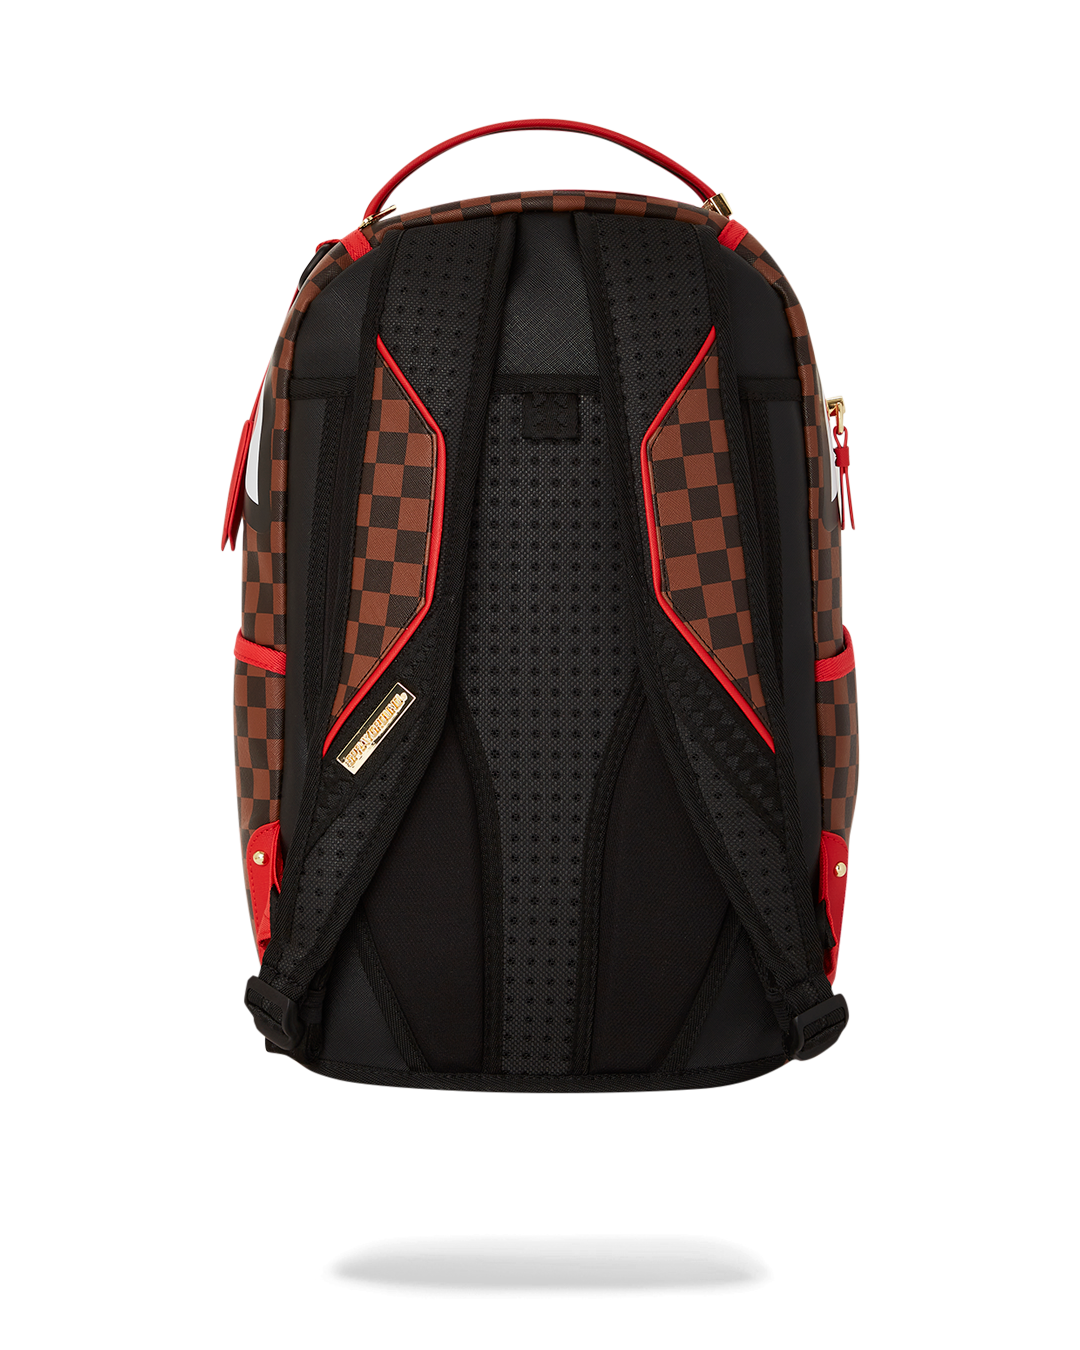 ALL OR NOTHING SHARKS IN PARIS CHATURANGA SHARK 1900 BACKPACK – SPRAYGROUND®